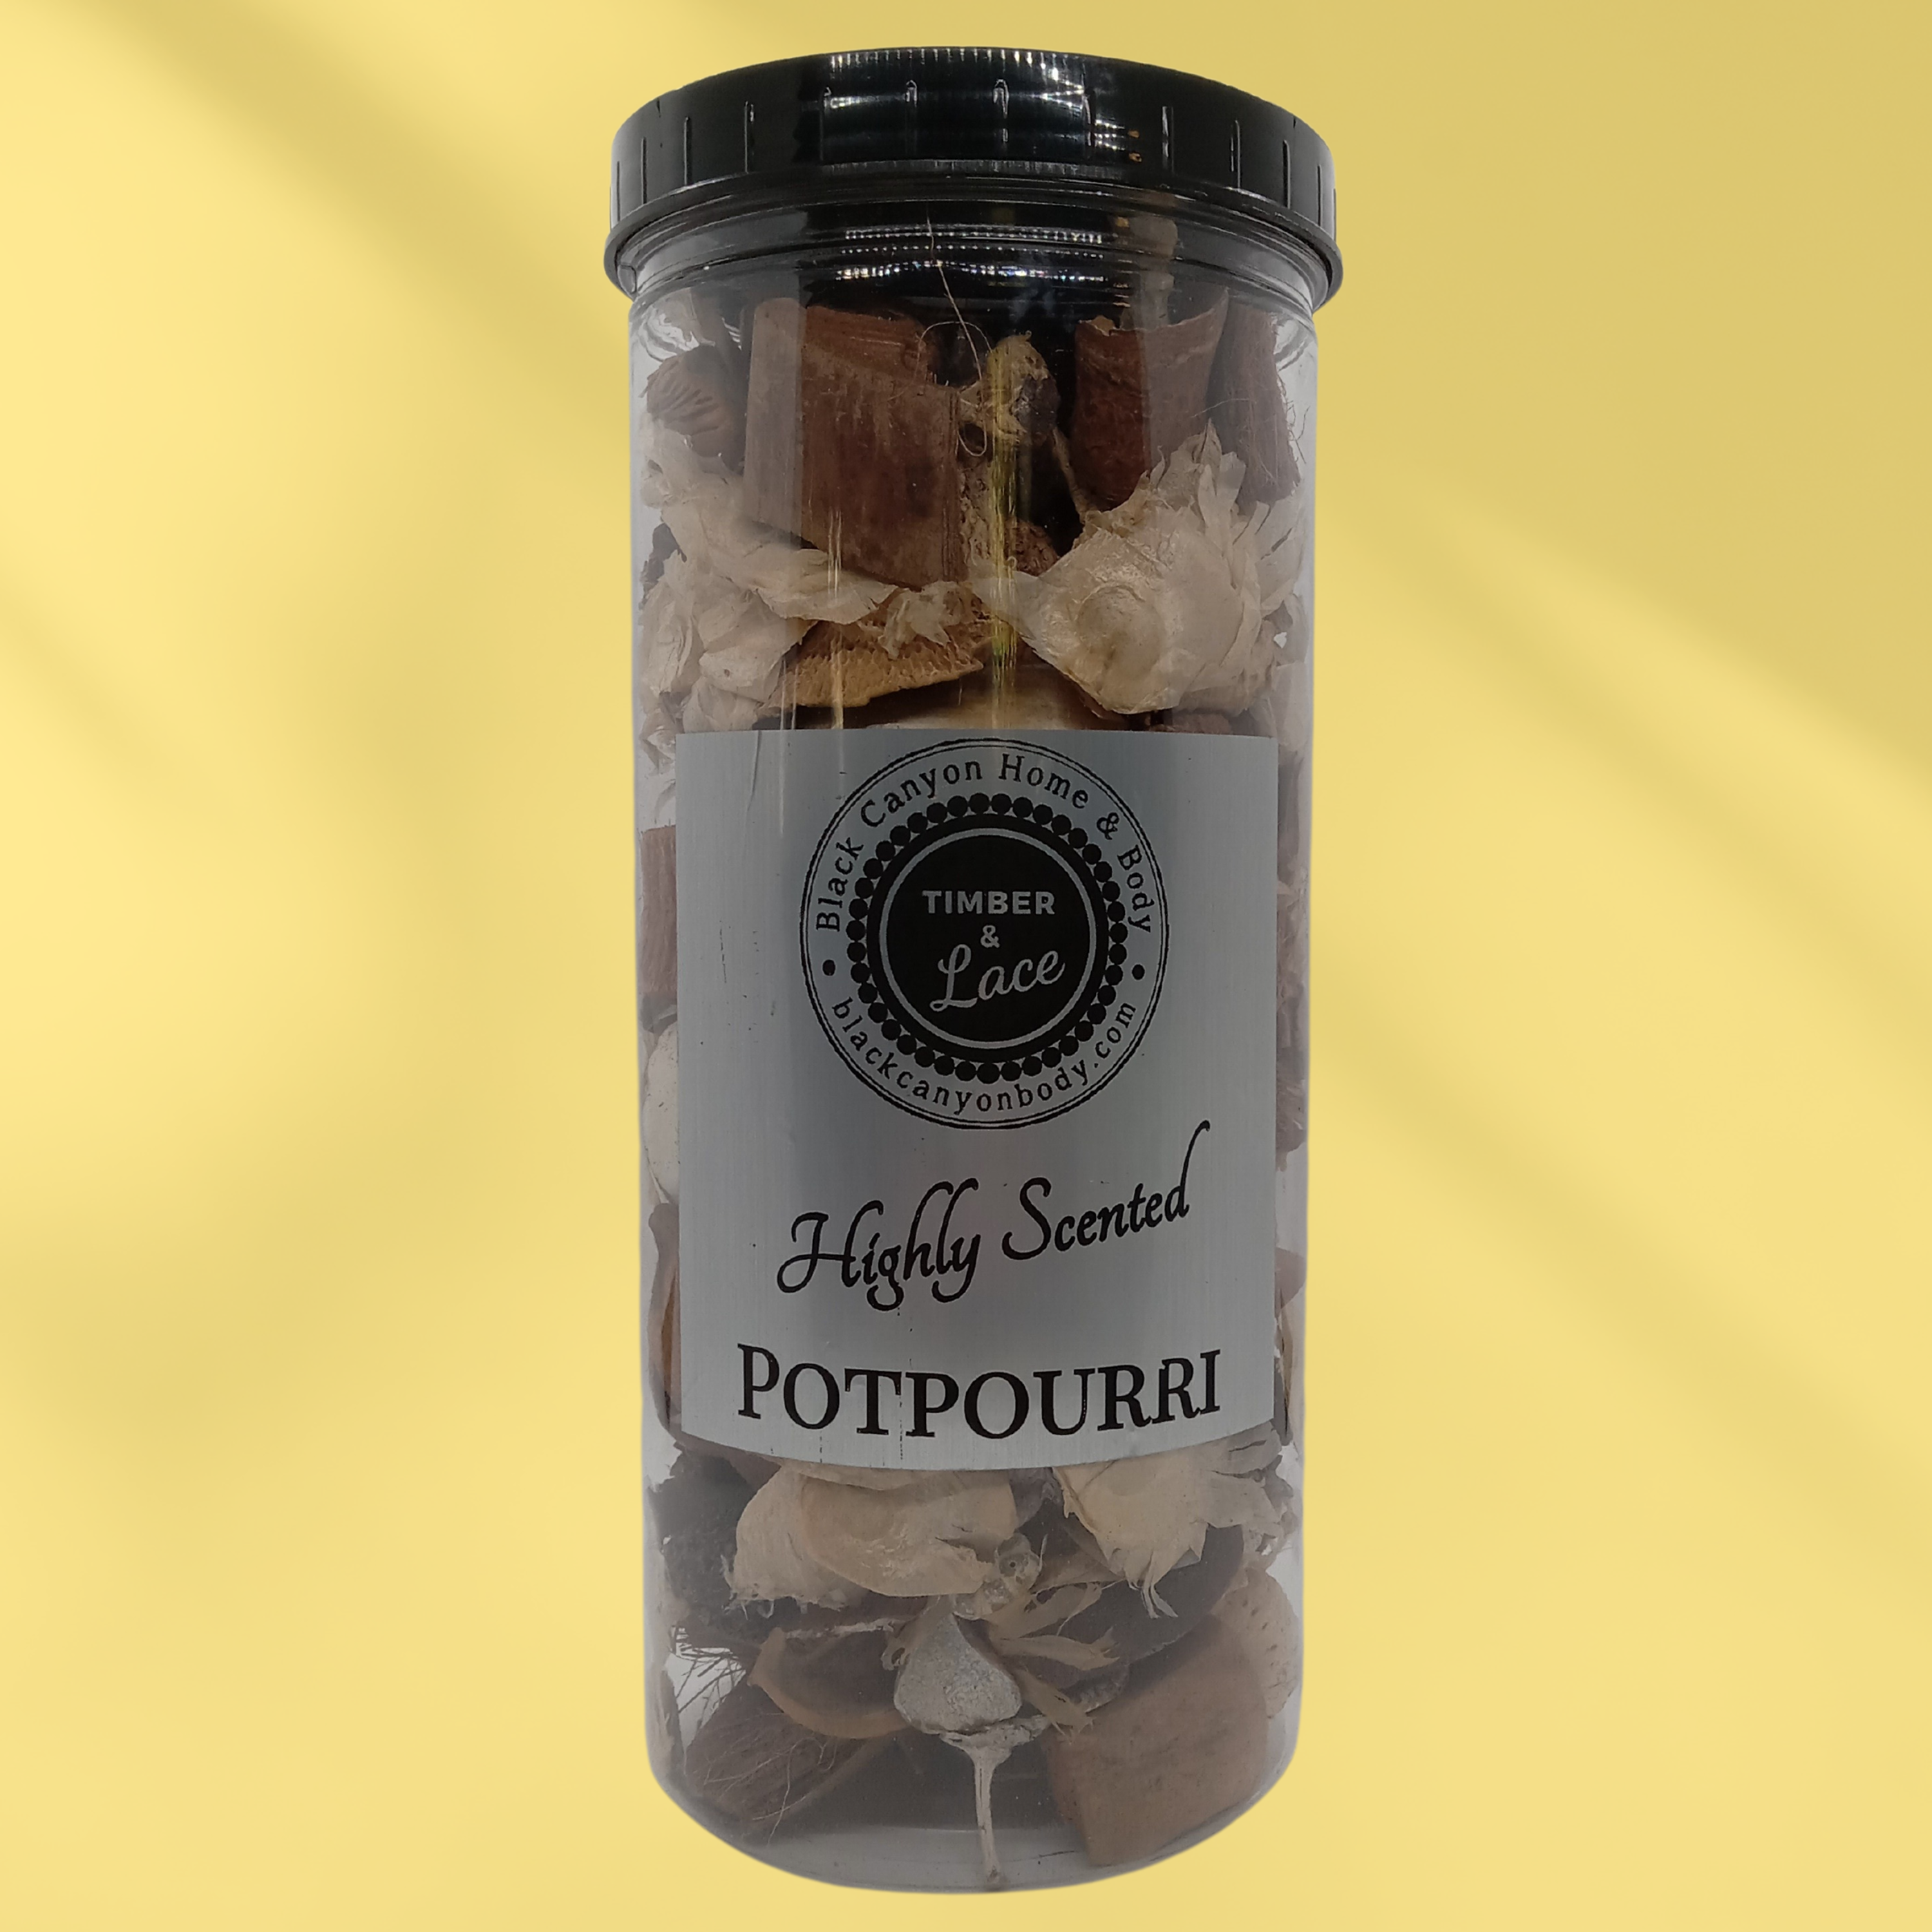 Timber & Lace Banana Taffy Scented Potpourri